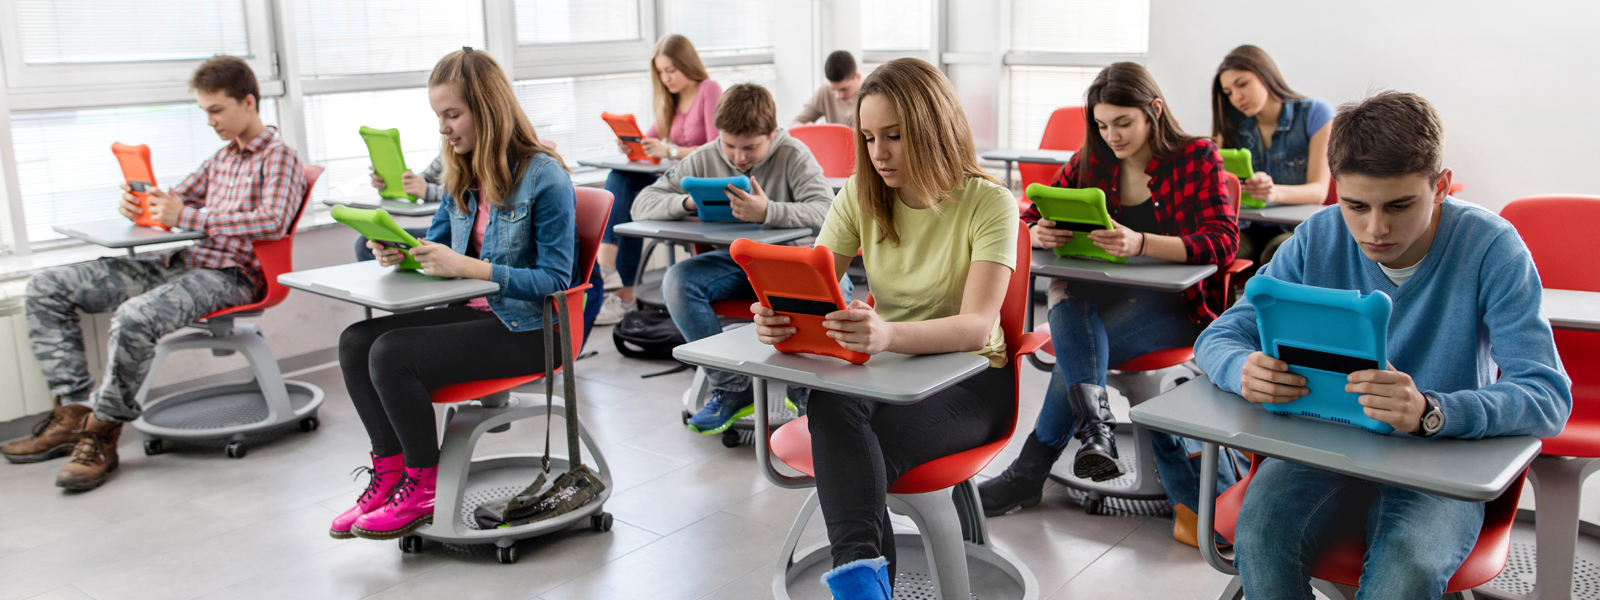 students reading at their desks, using tablets